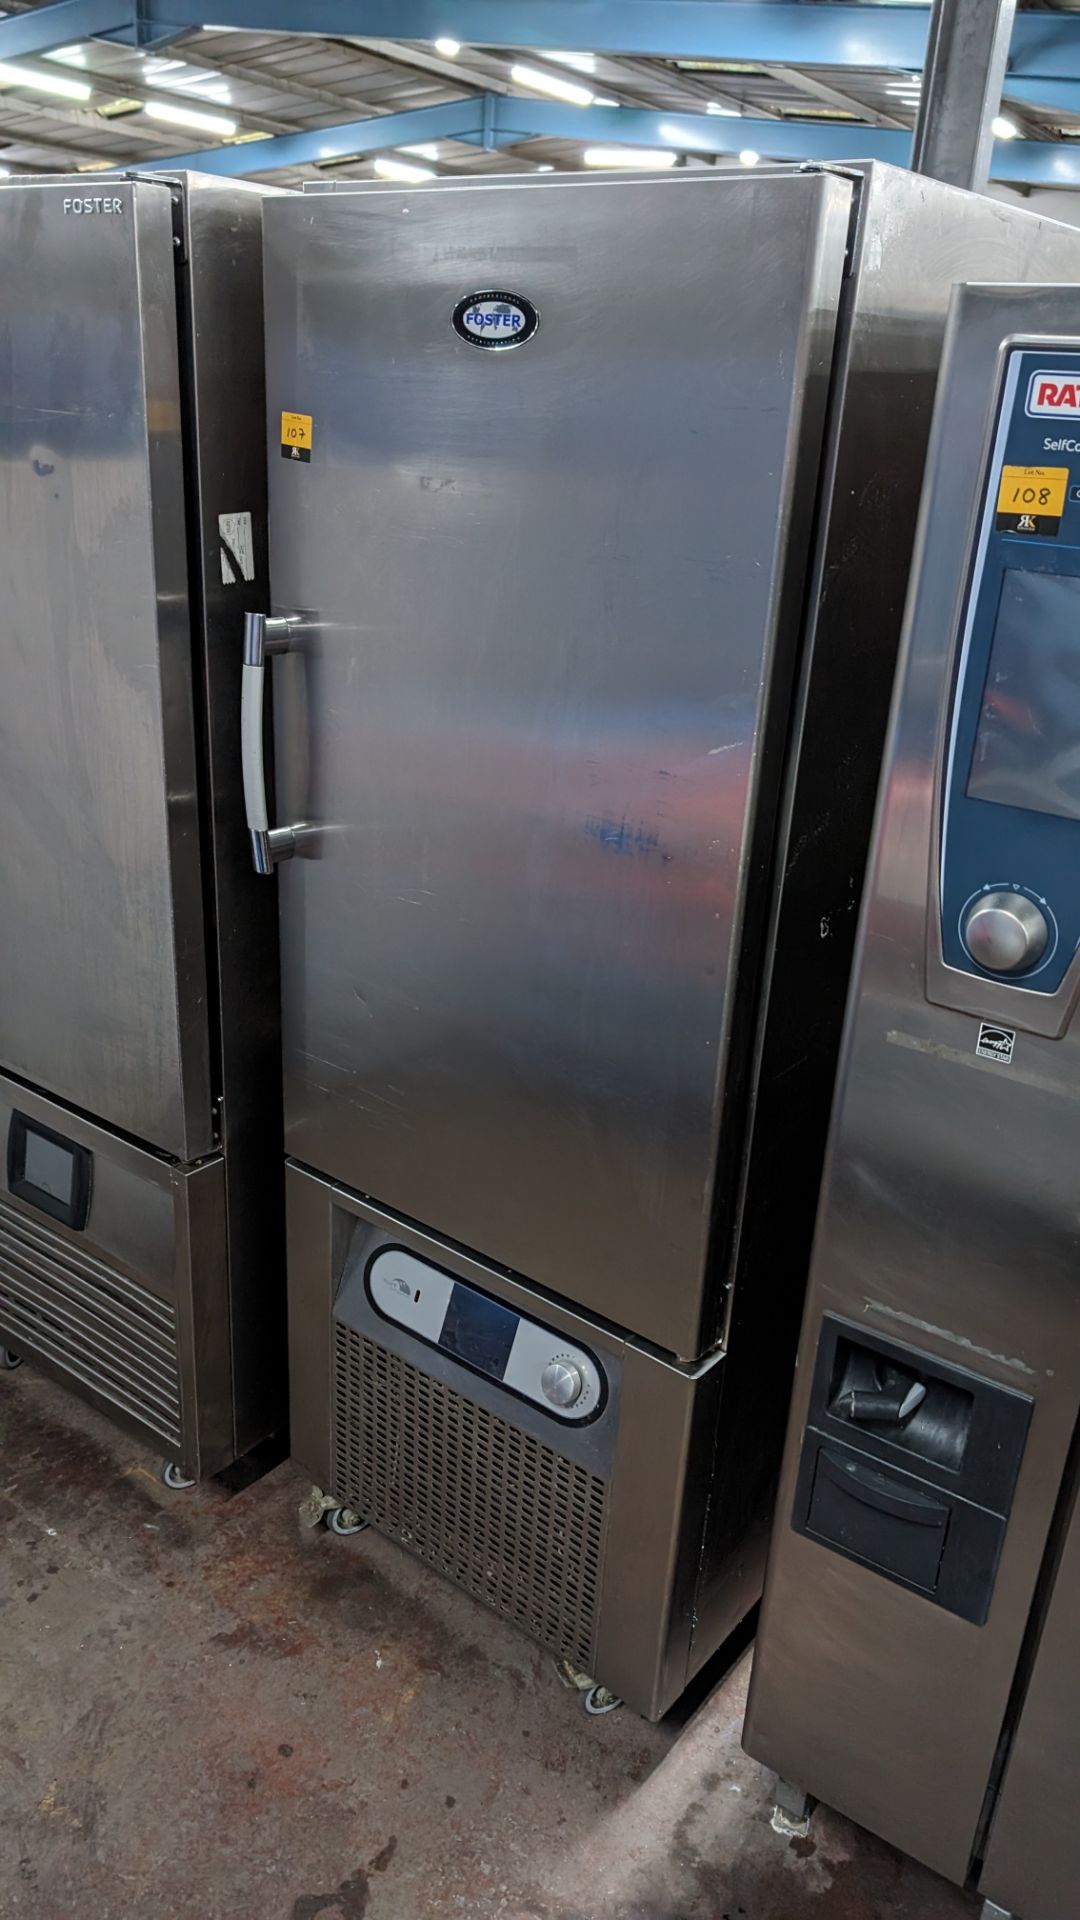 Foster stainless steel floor standing mobile blast chiller model BC36, with control panel to front - Image 2 of 7